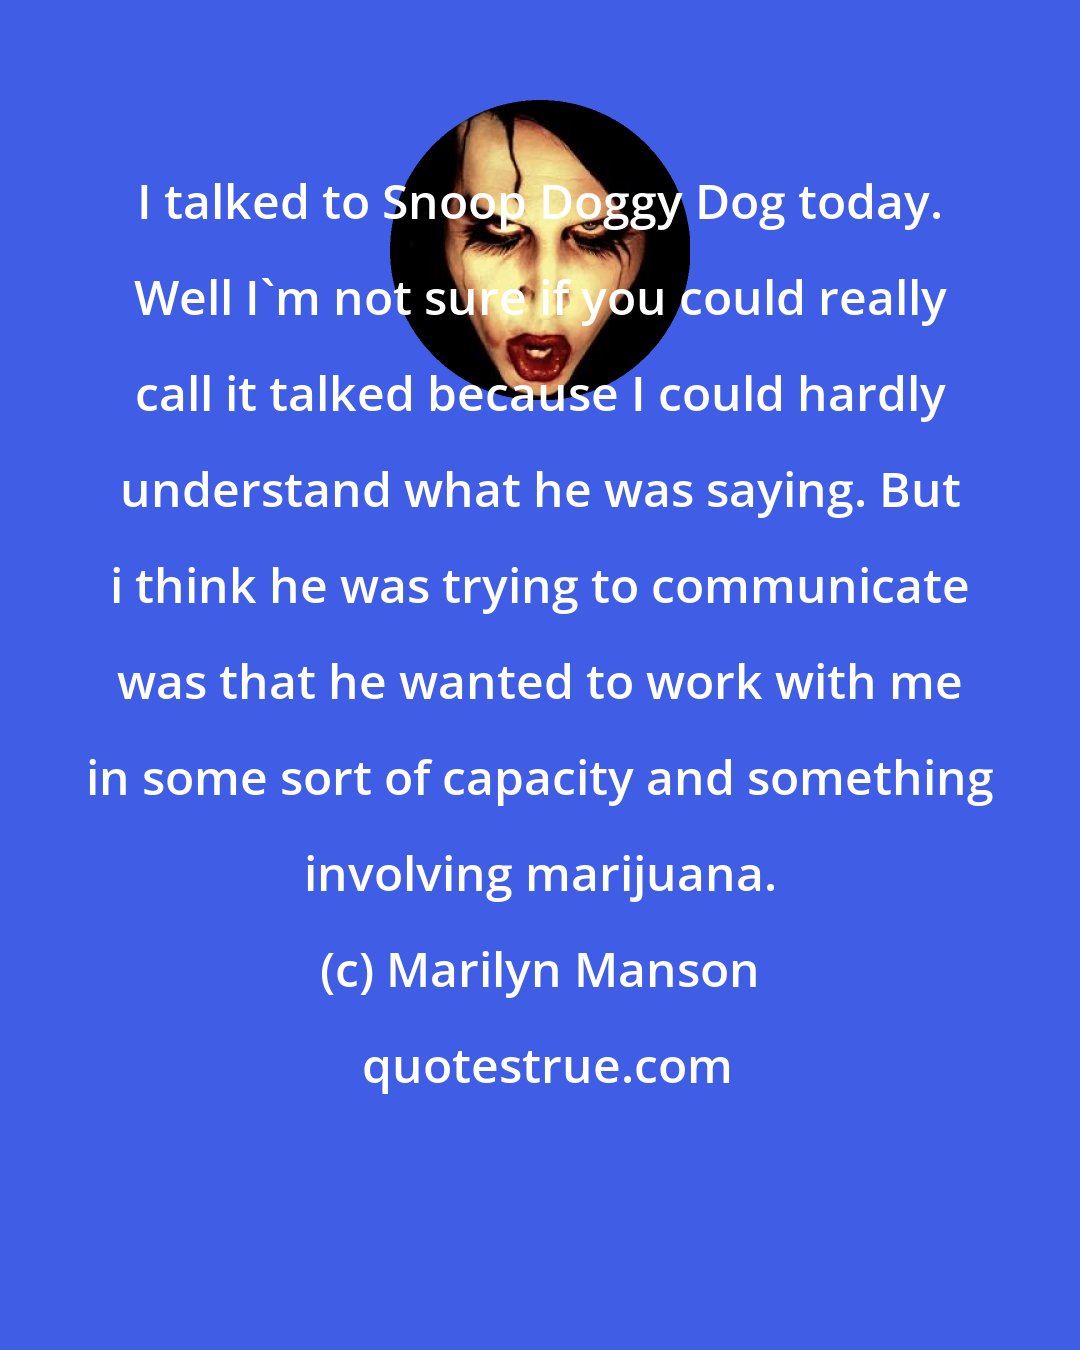 Marilyn Manson: I talked to Snoop Doggy Dog today. Well I'm not sure if you could really call it talked because I could hardly understand what he was saying. But i think he was trying to communicate was that he wanted to work with me in some sort of capacity and something involving marijuana.